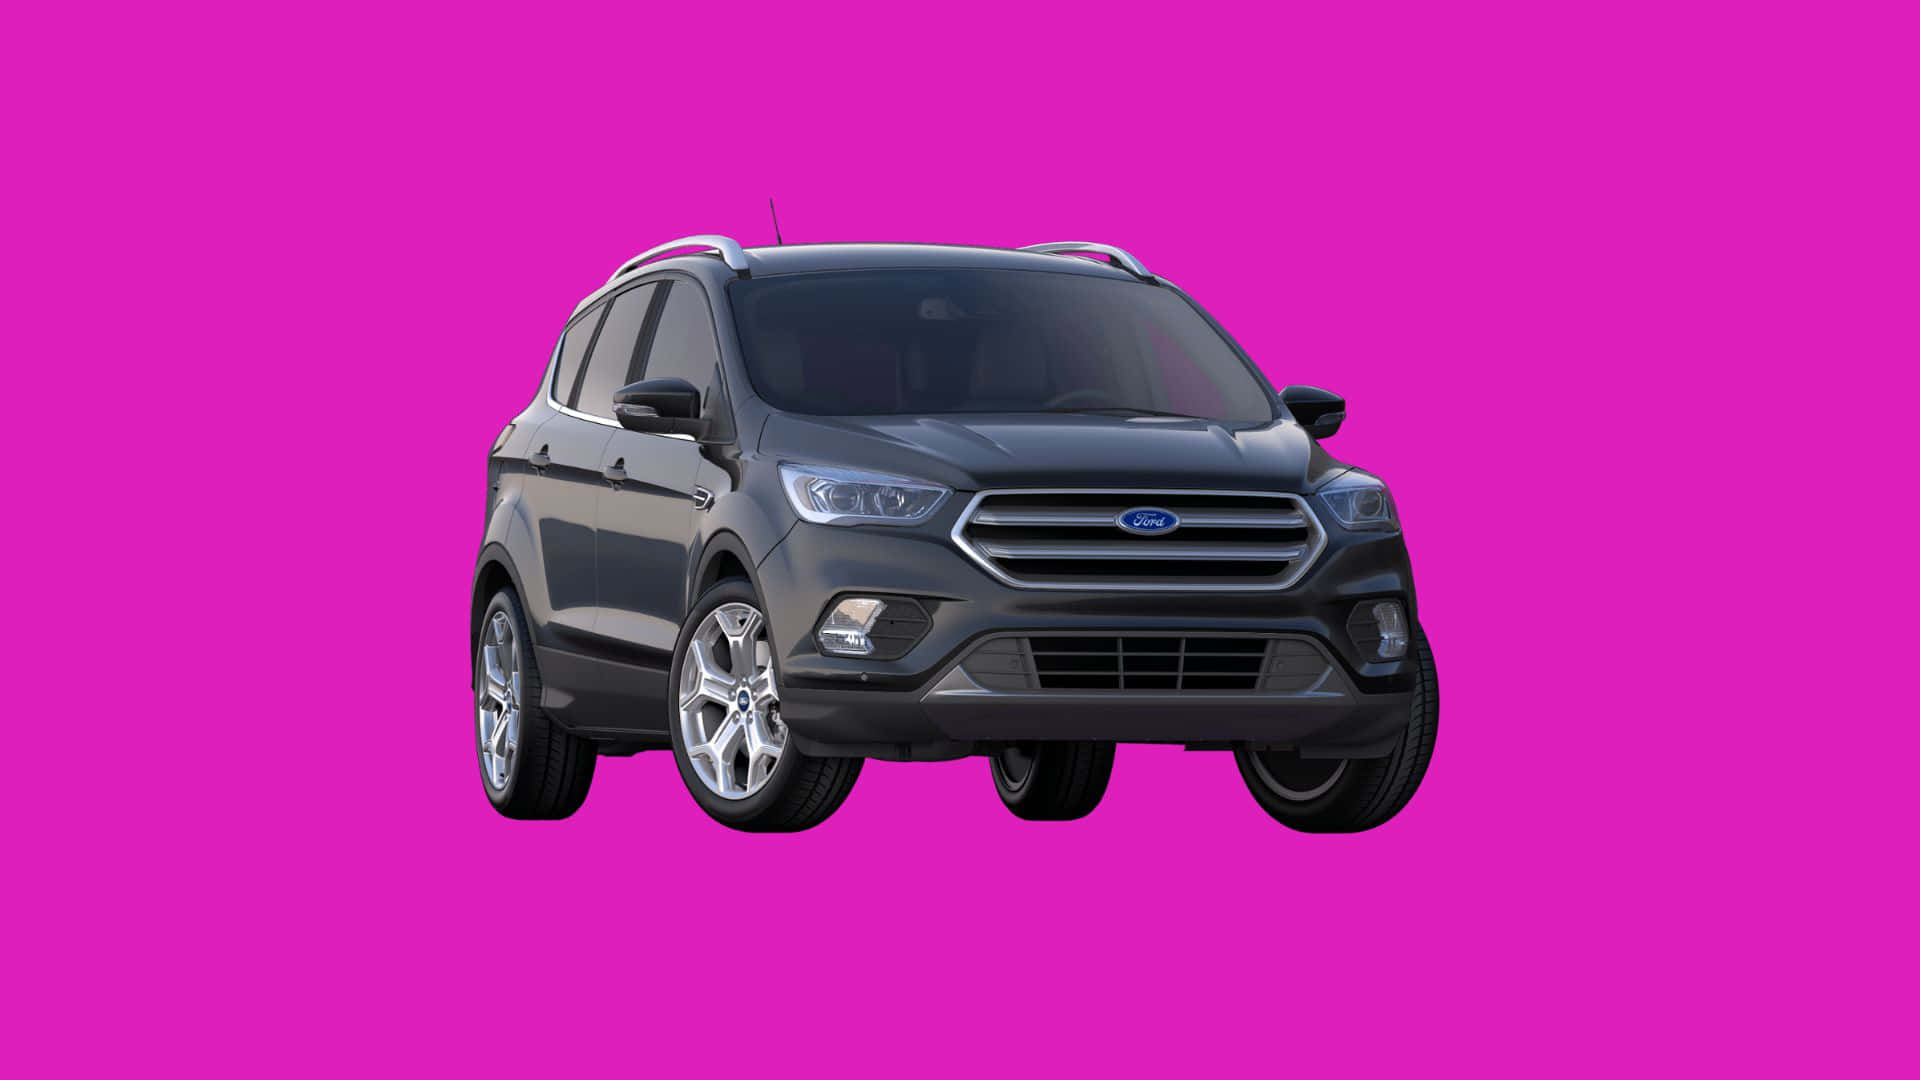 Stylish Ford Escape on the road Wallpaper